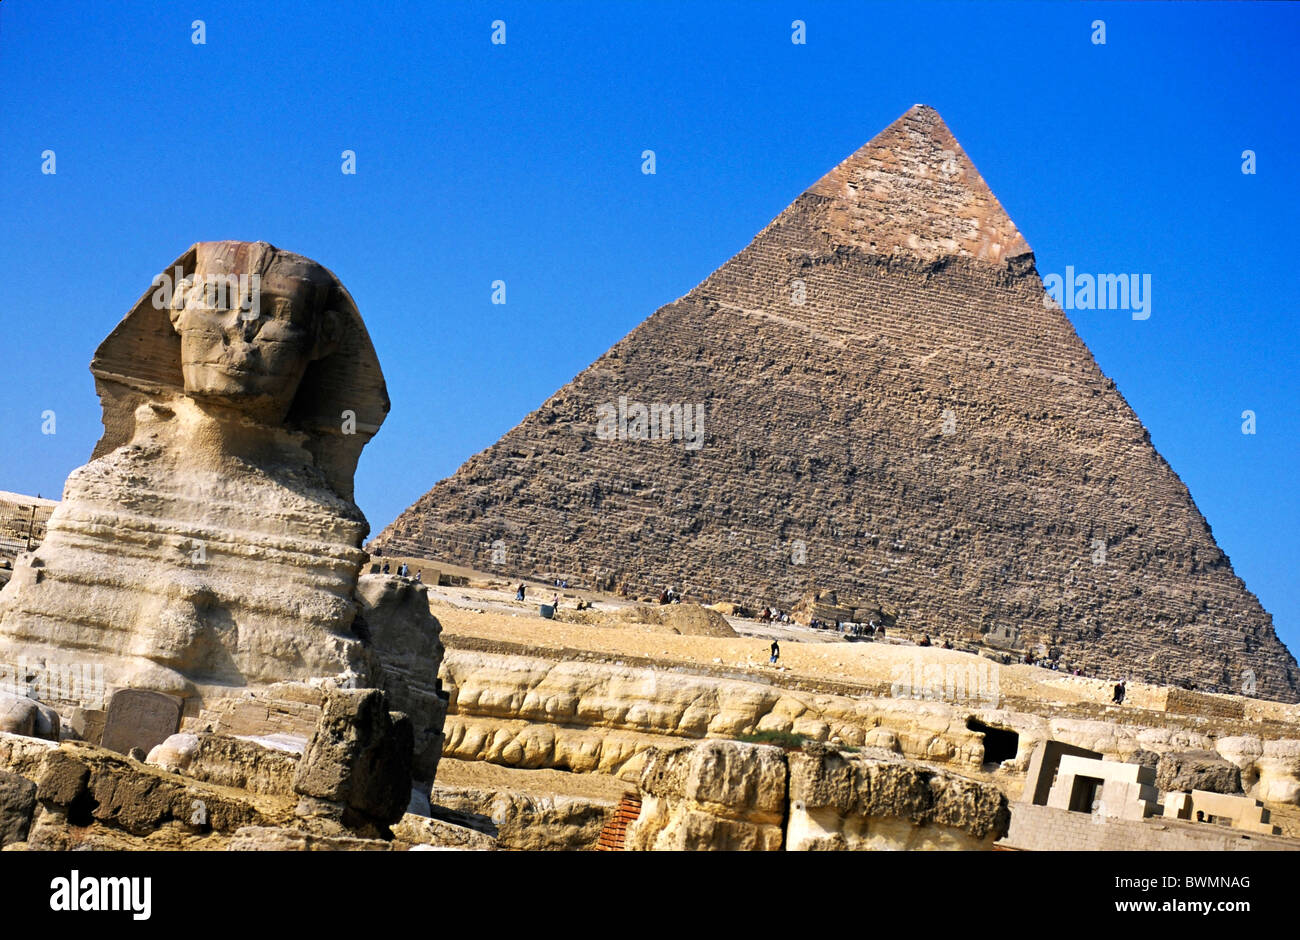 Sphinx with the Khephren Pyramid in the background, Giza, Egypt. Stock Photo